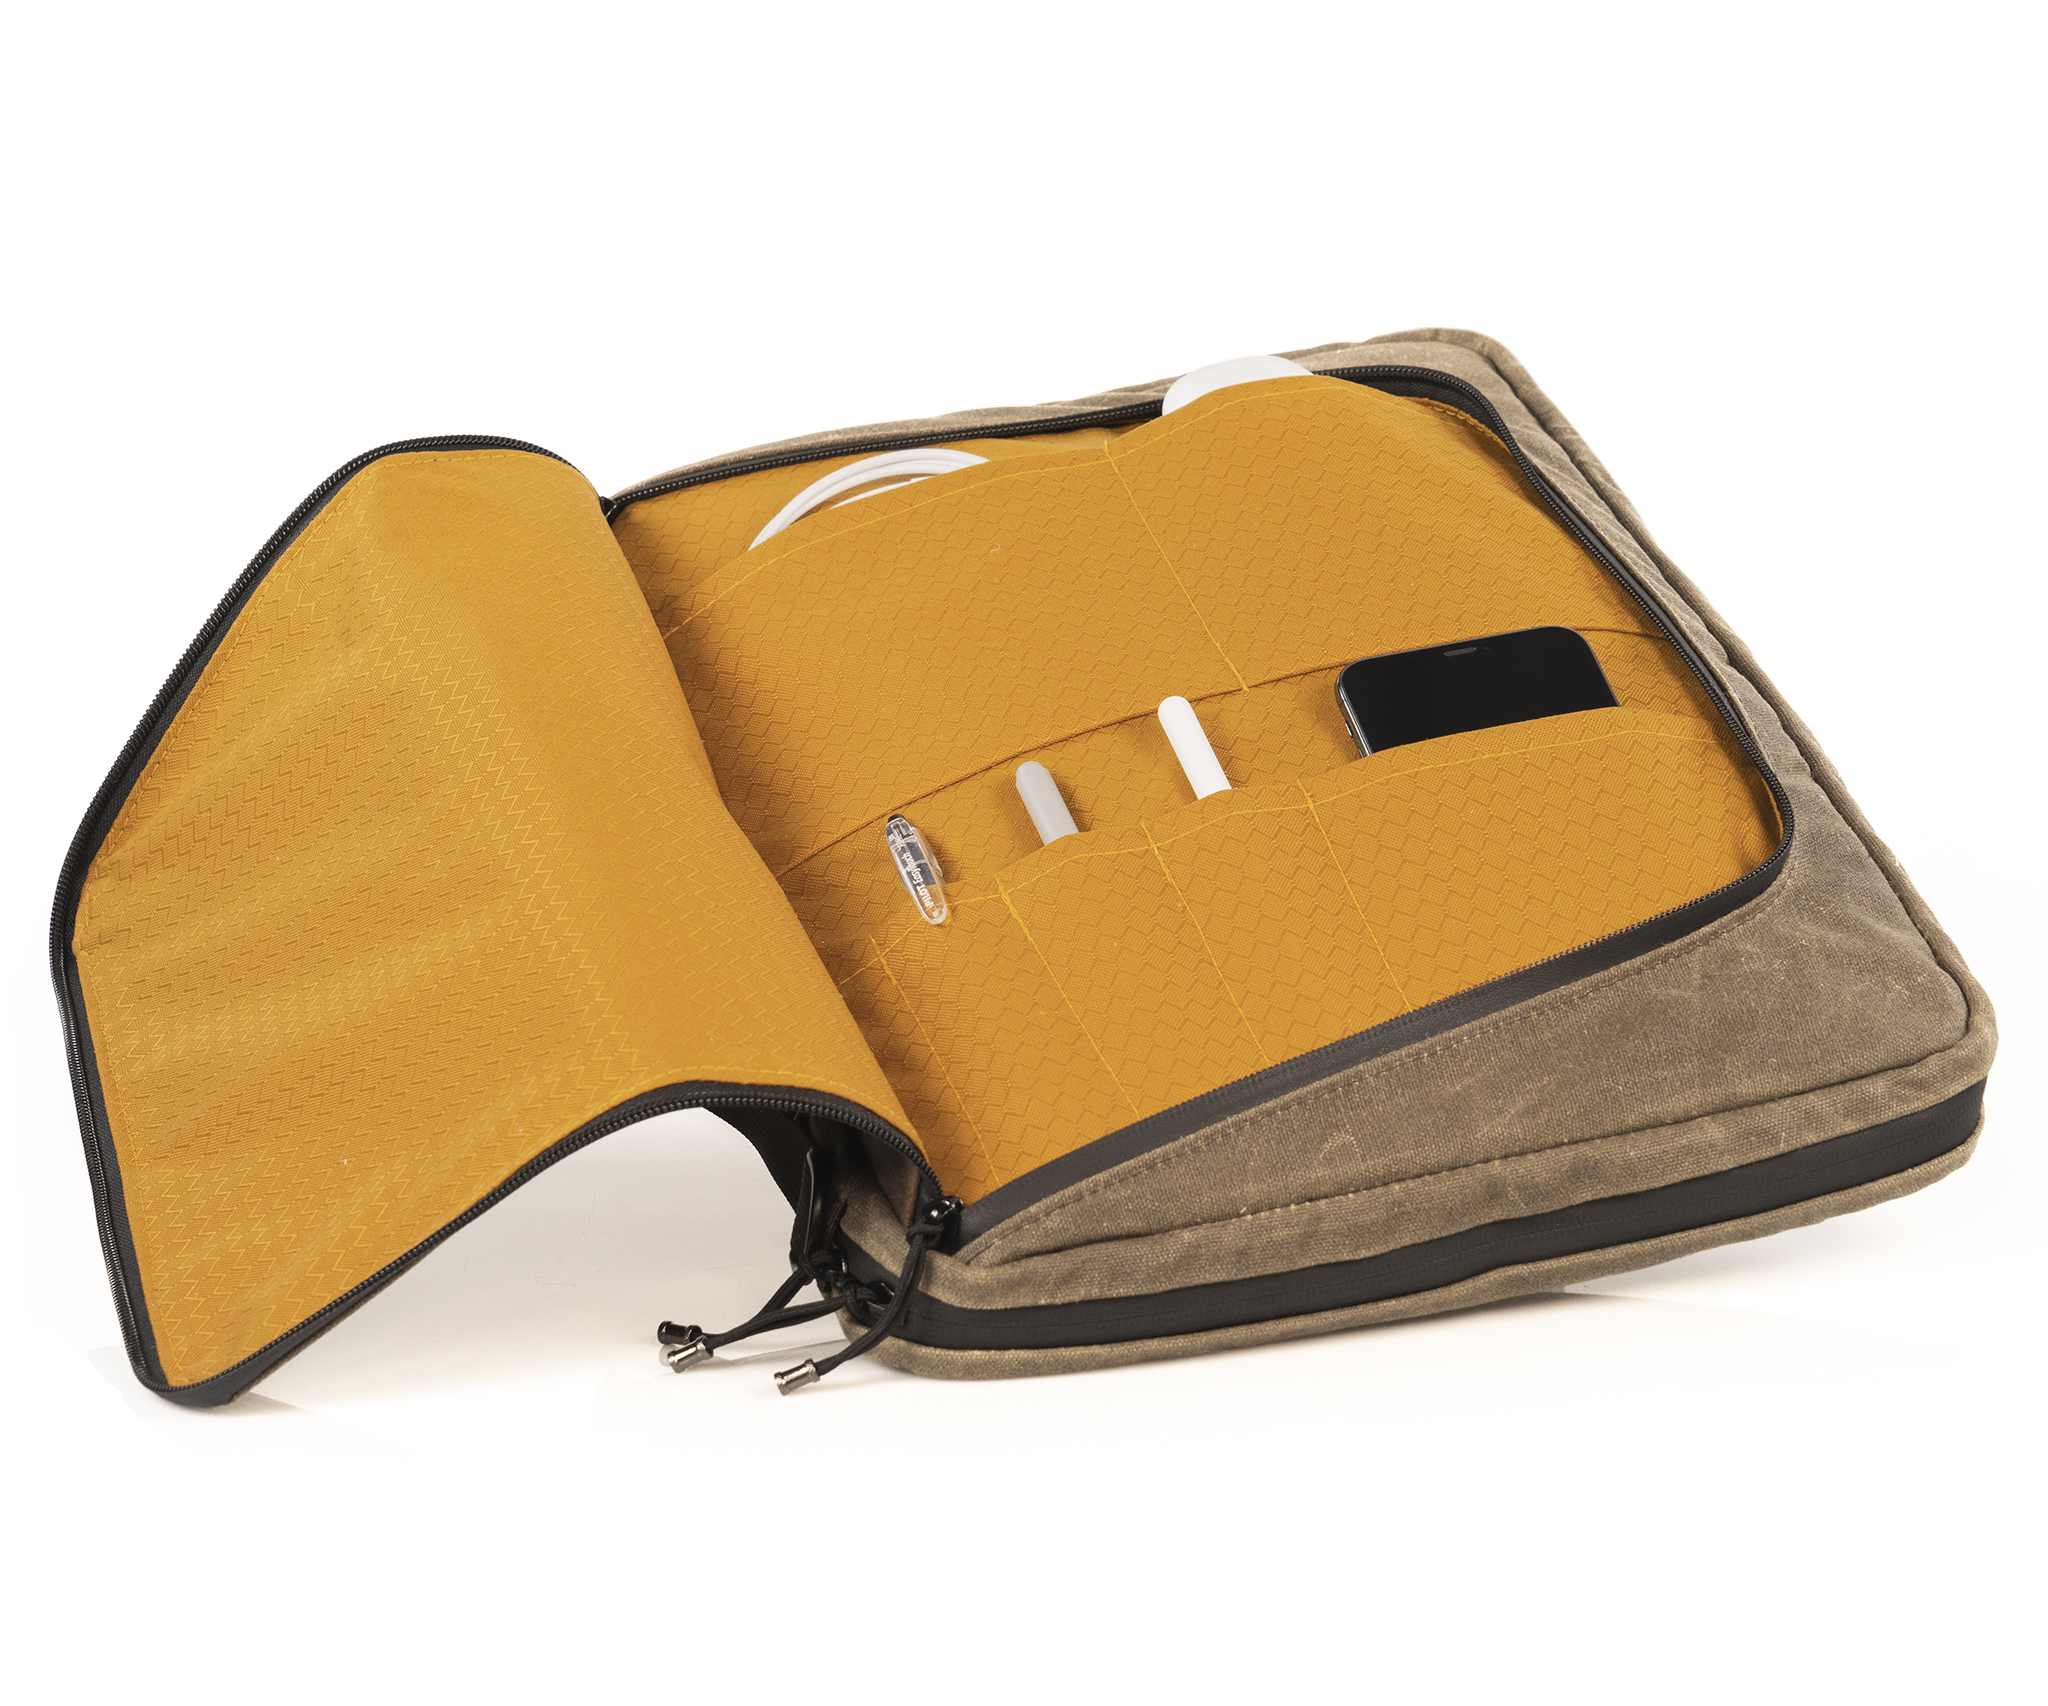 Front flap pocket with interior organization